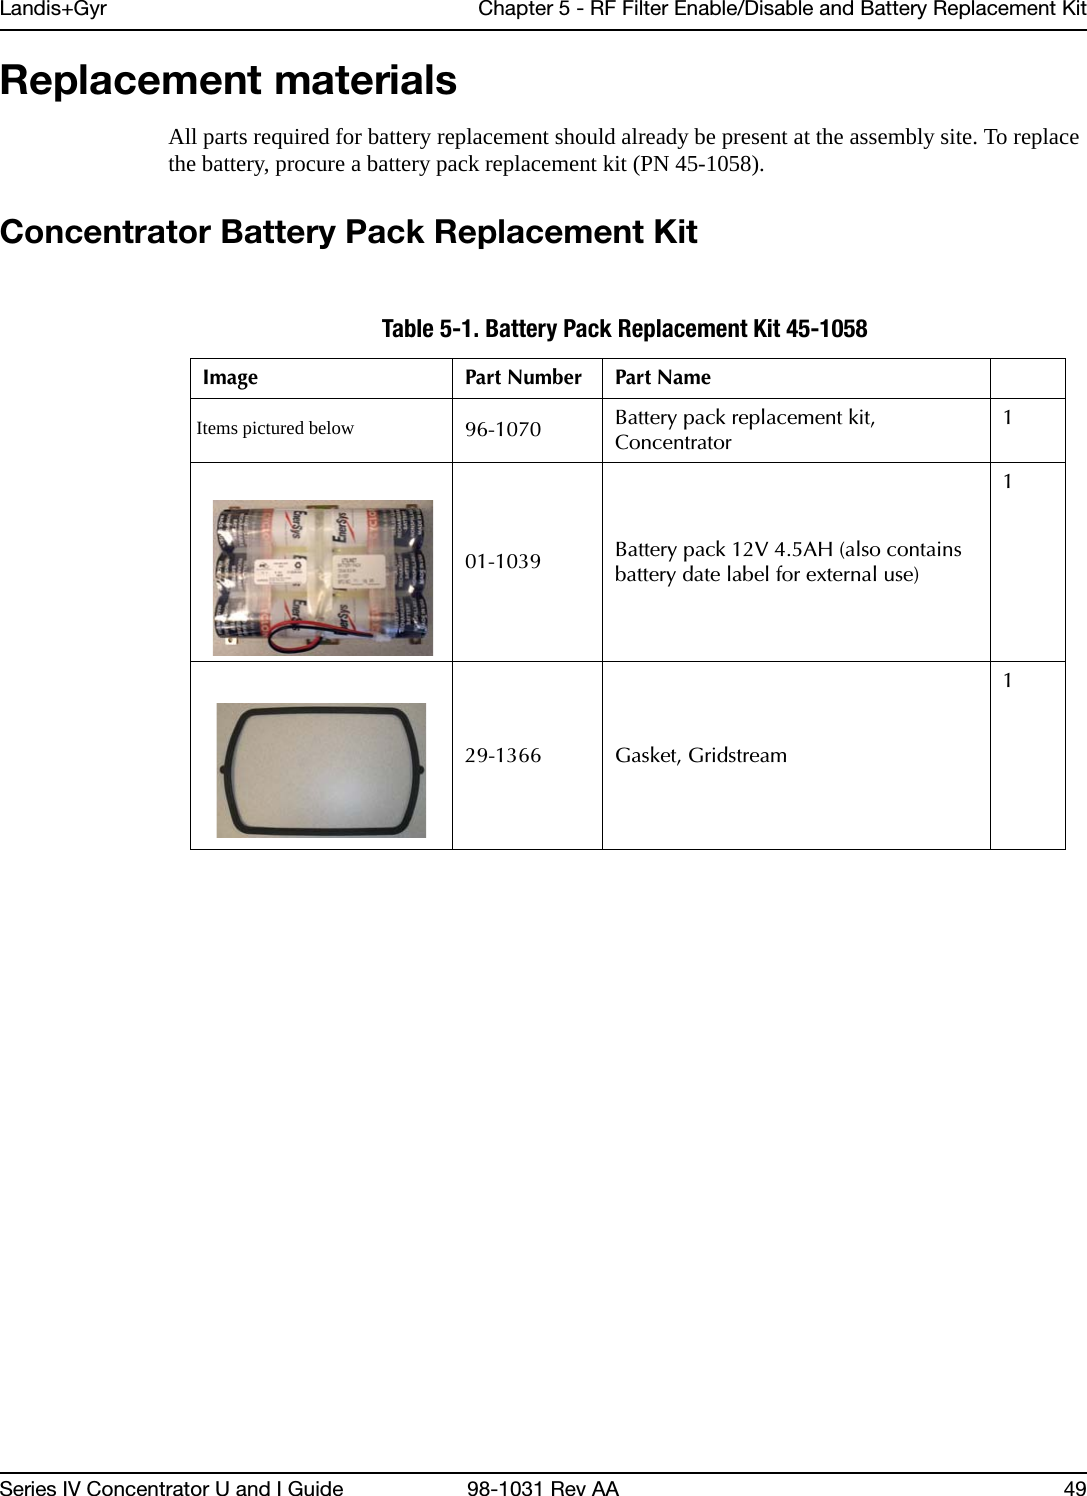 Landis+Gyr Chapter 5 - RF Filter Enable/Disable and Battery Replacement KitSeries IV Concentrator U and I Guide 98-1031 Rev AA 49Replacement materialsAll parts required for battery replacement should already be present at the assembly site. To replace the battery, procure a battery pack replacement kit (PN 45-1058).Concentrator Battery Pack Replacement KitTable 5-1. Battery Pack Replacement Kit 45-1058Image Part Number Part NameItems pictured below 96-1070 Battery pack replacement kit, Concentrator101-1039 Battery pack 12V 4.5AH (also contains battery date label for external use)129-1366 Gasket, Gridstream1